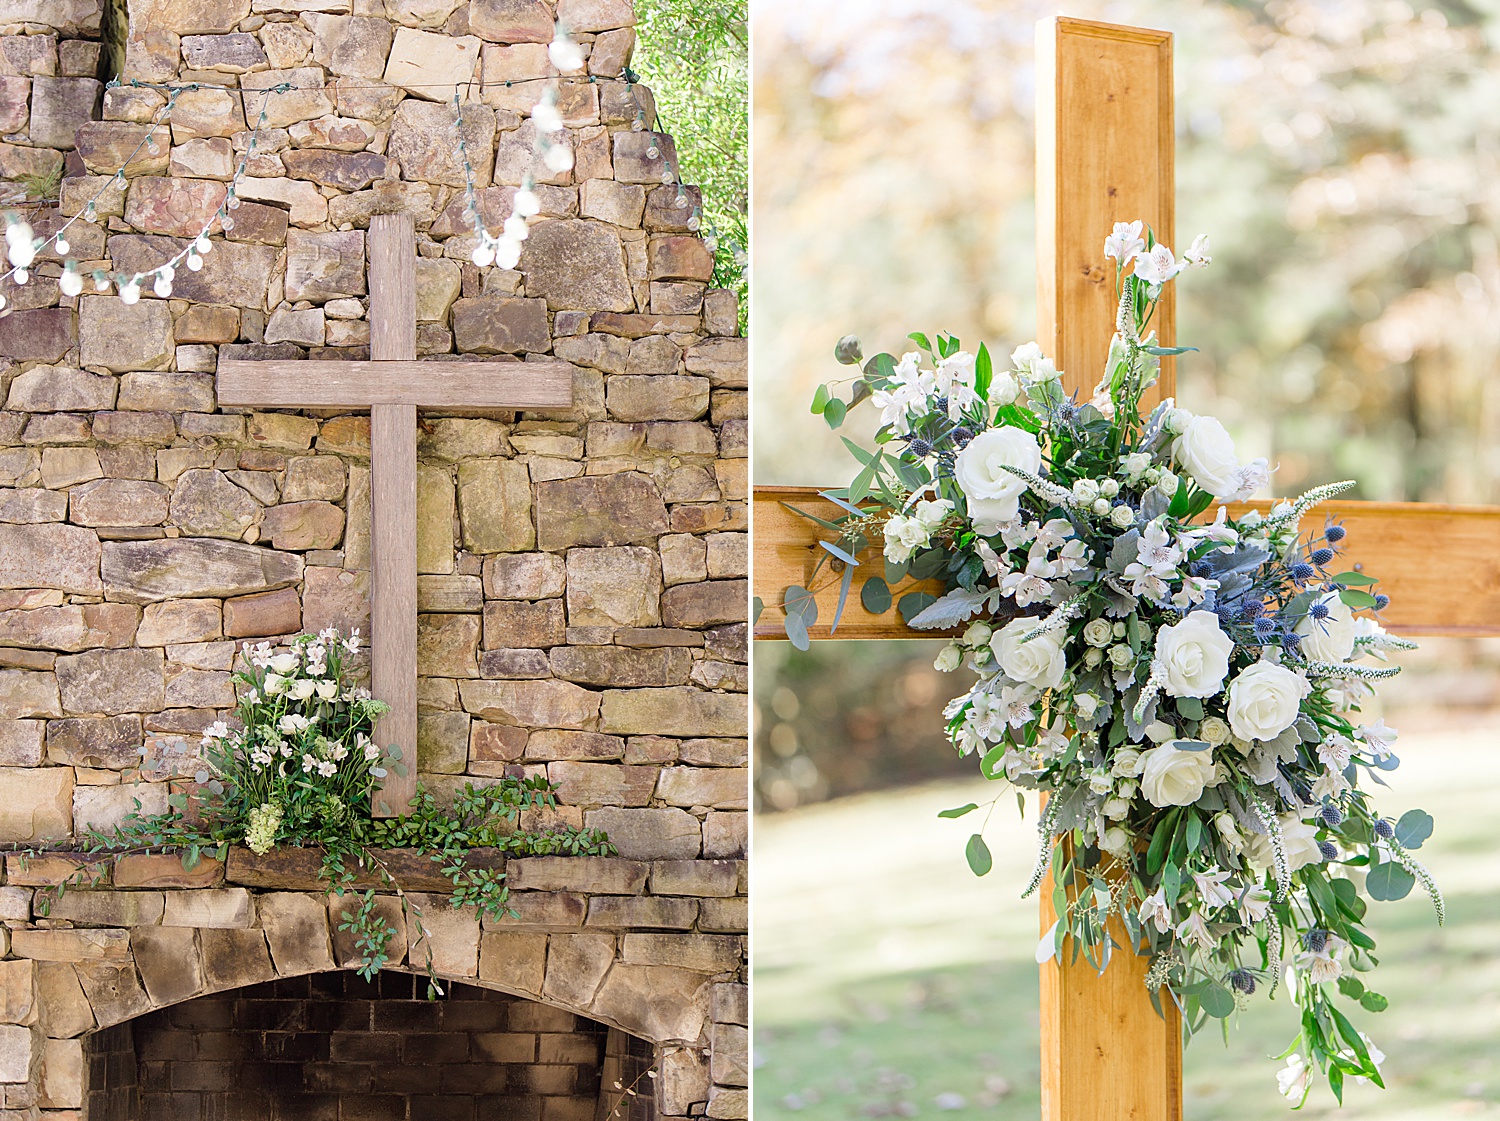 wedding ceremony with cross and flower decorations